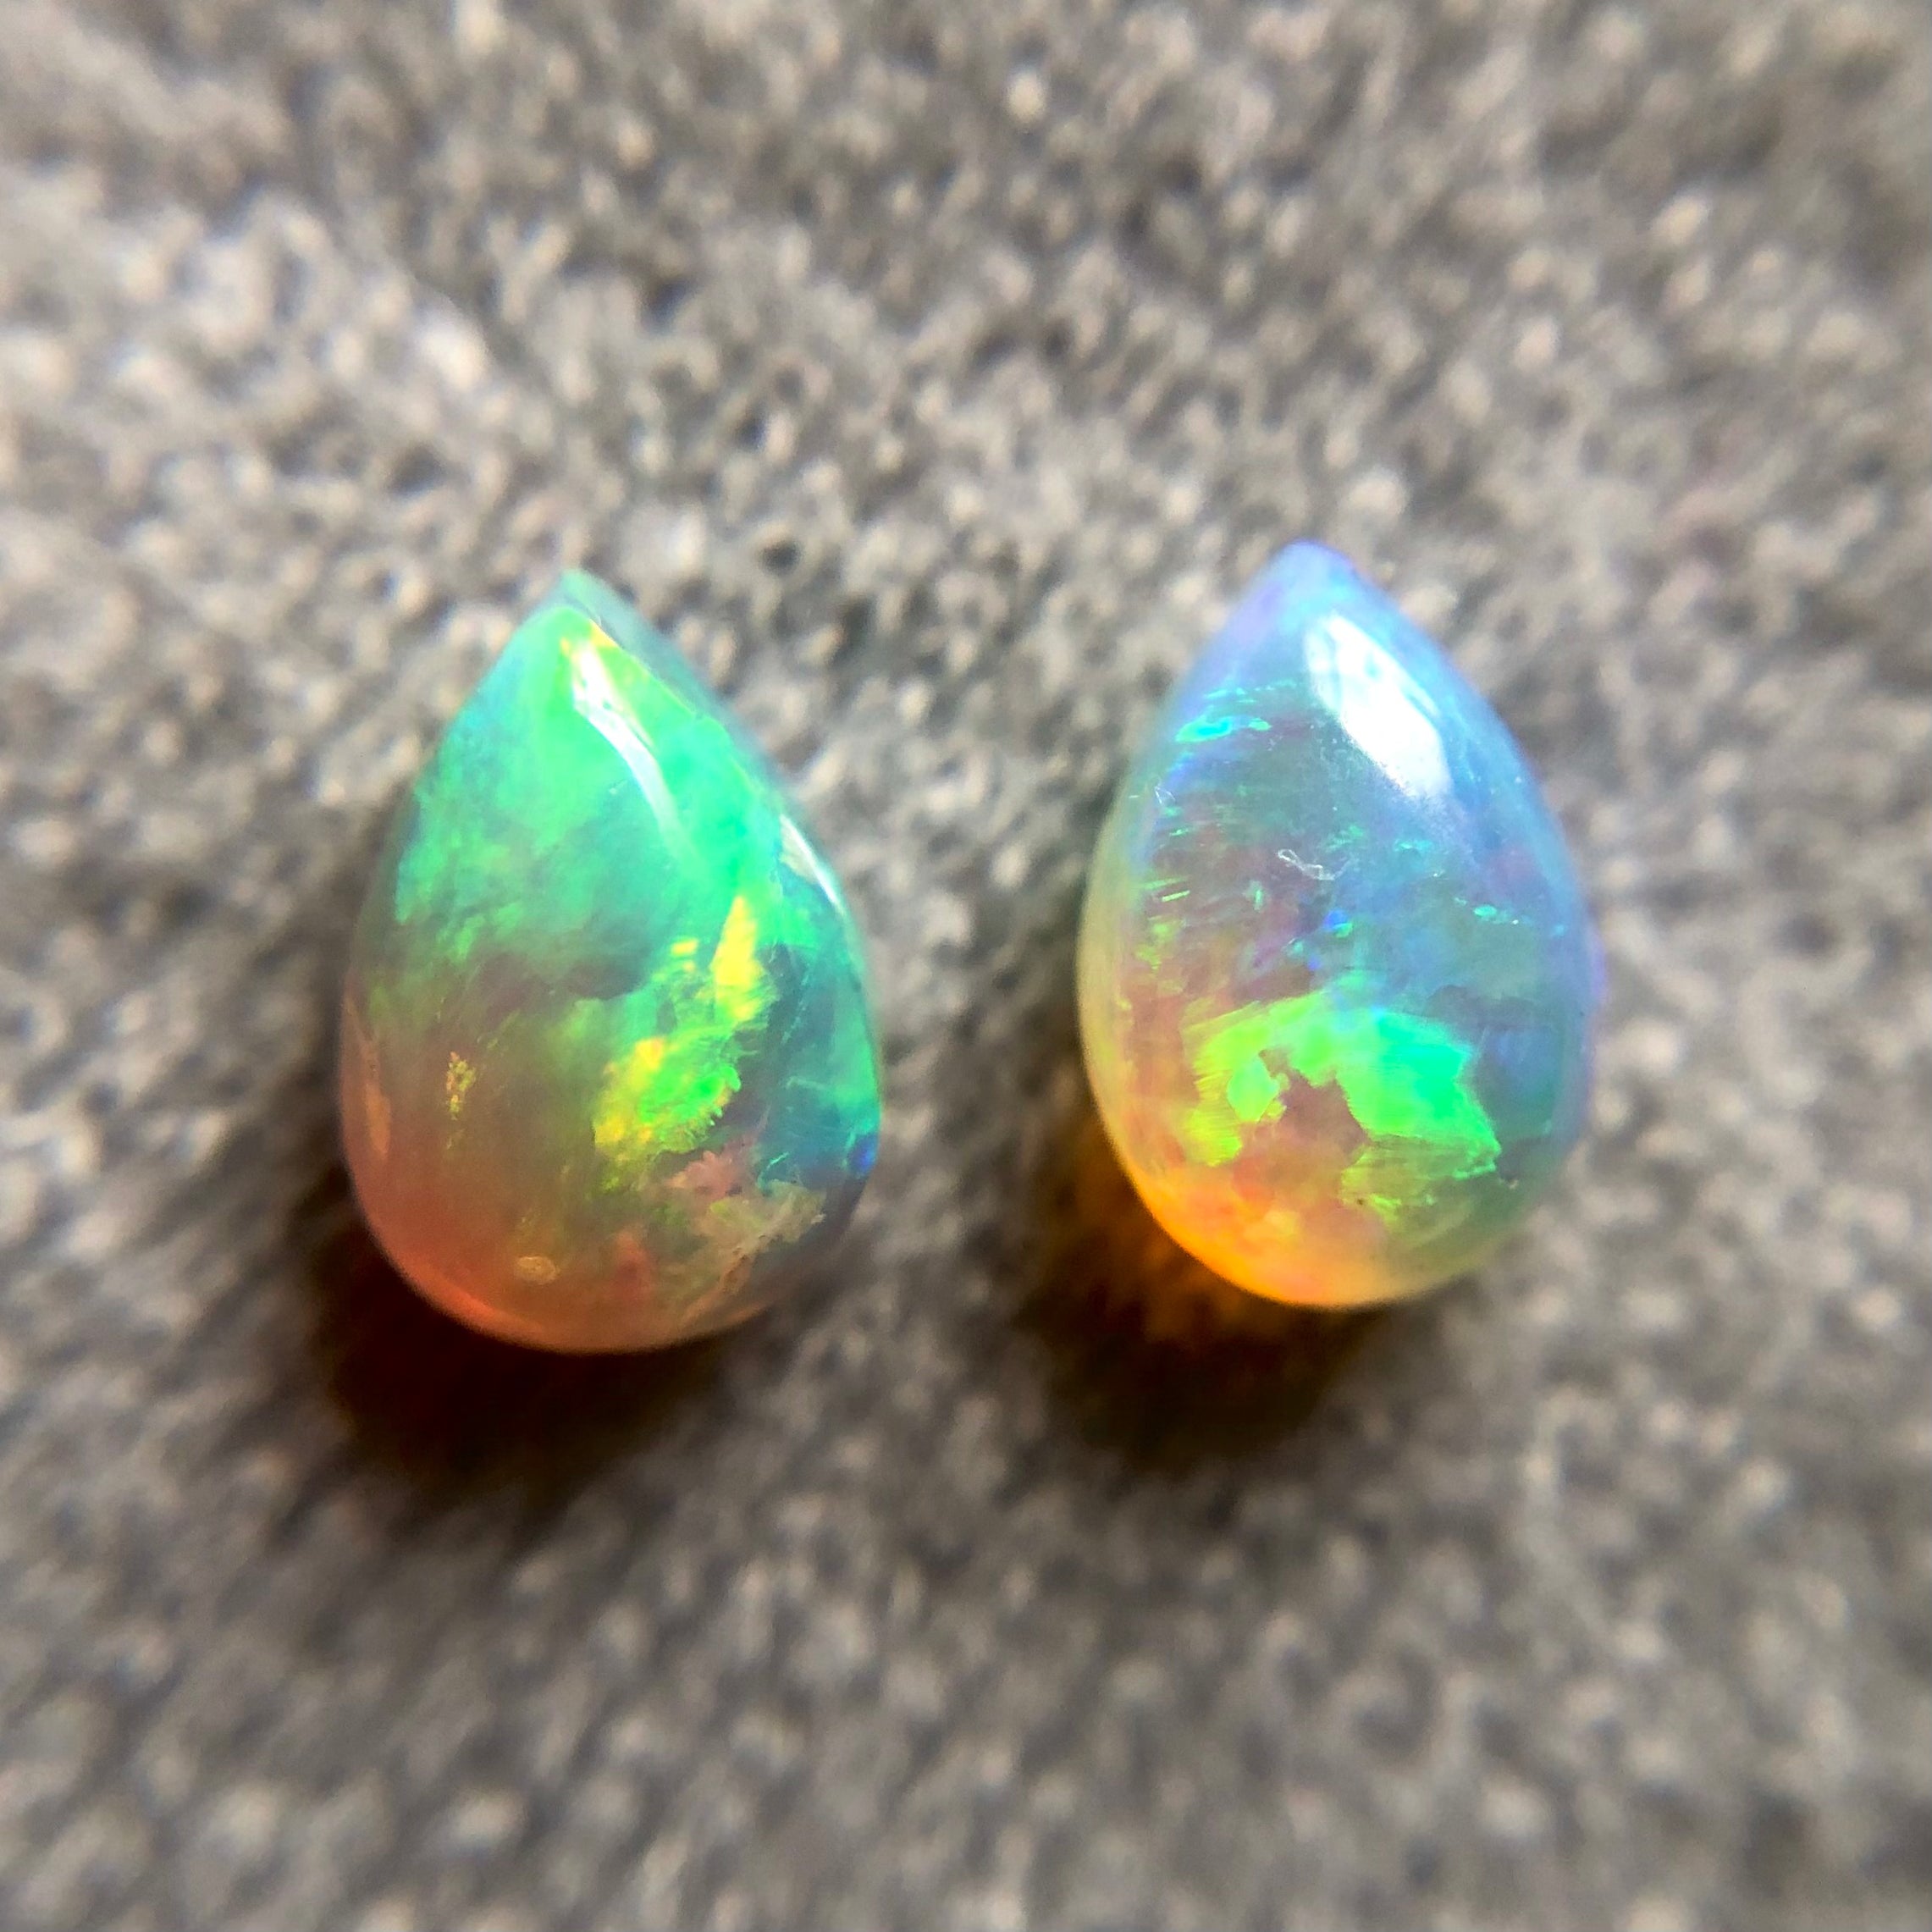 Australian jelly opal matched pair 0.80 carat total loose gemstone - B ...